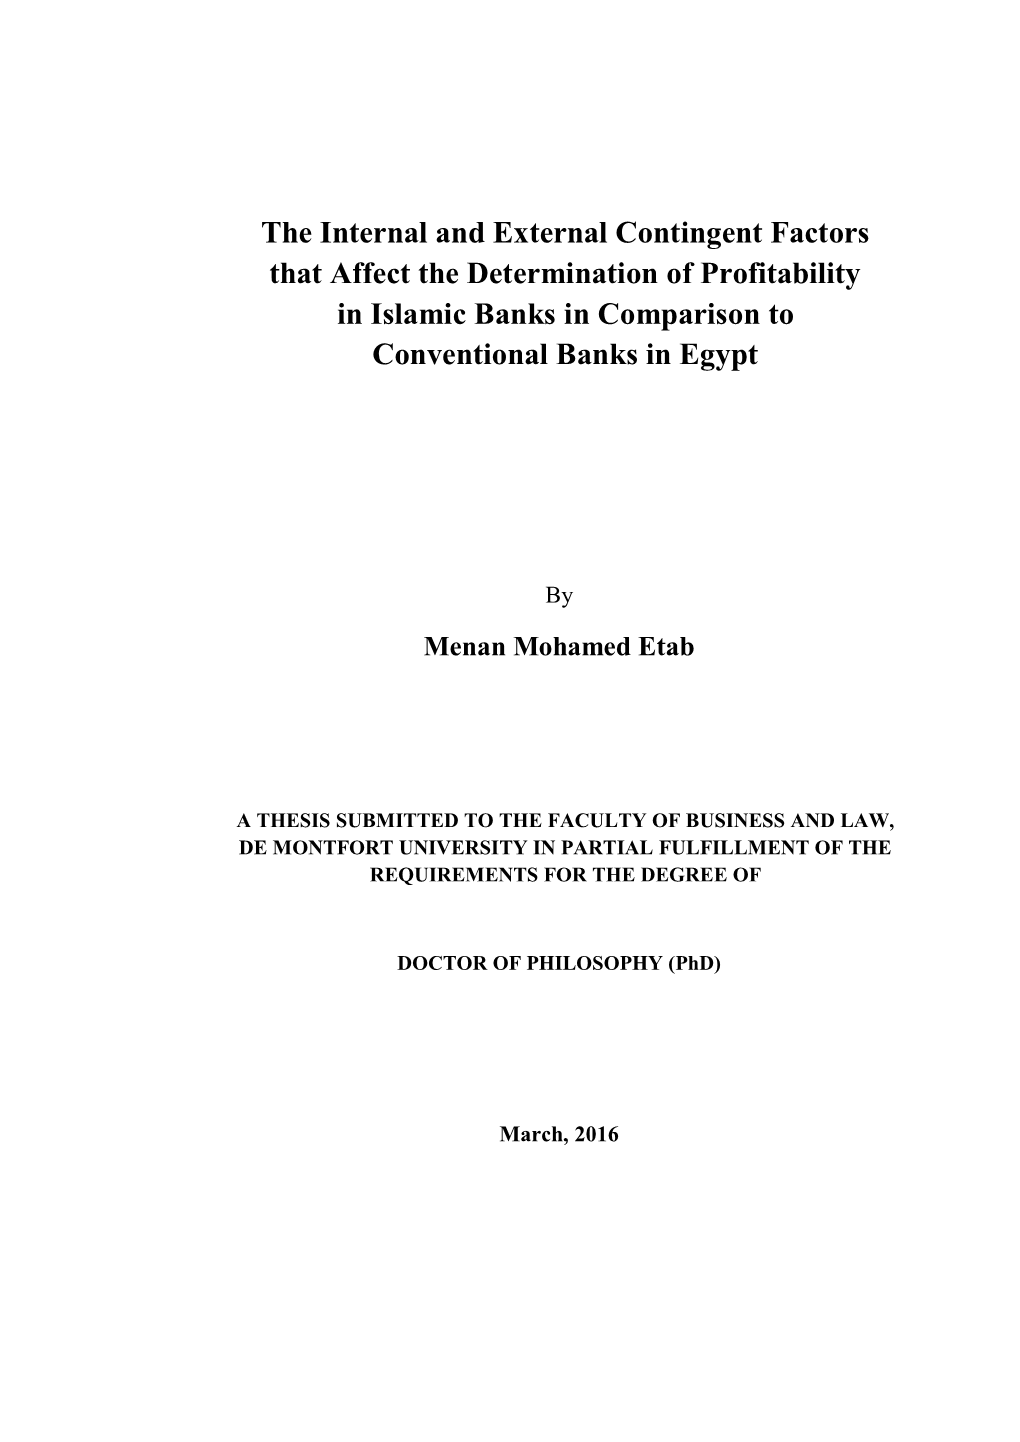 The Internal and External Contingent Factors That Affect the Determination of Profitability in Islamic Banks in Comparison to Conventional Banks in Egypt